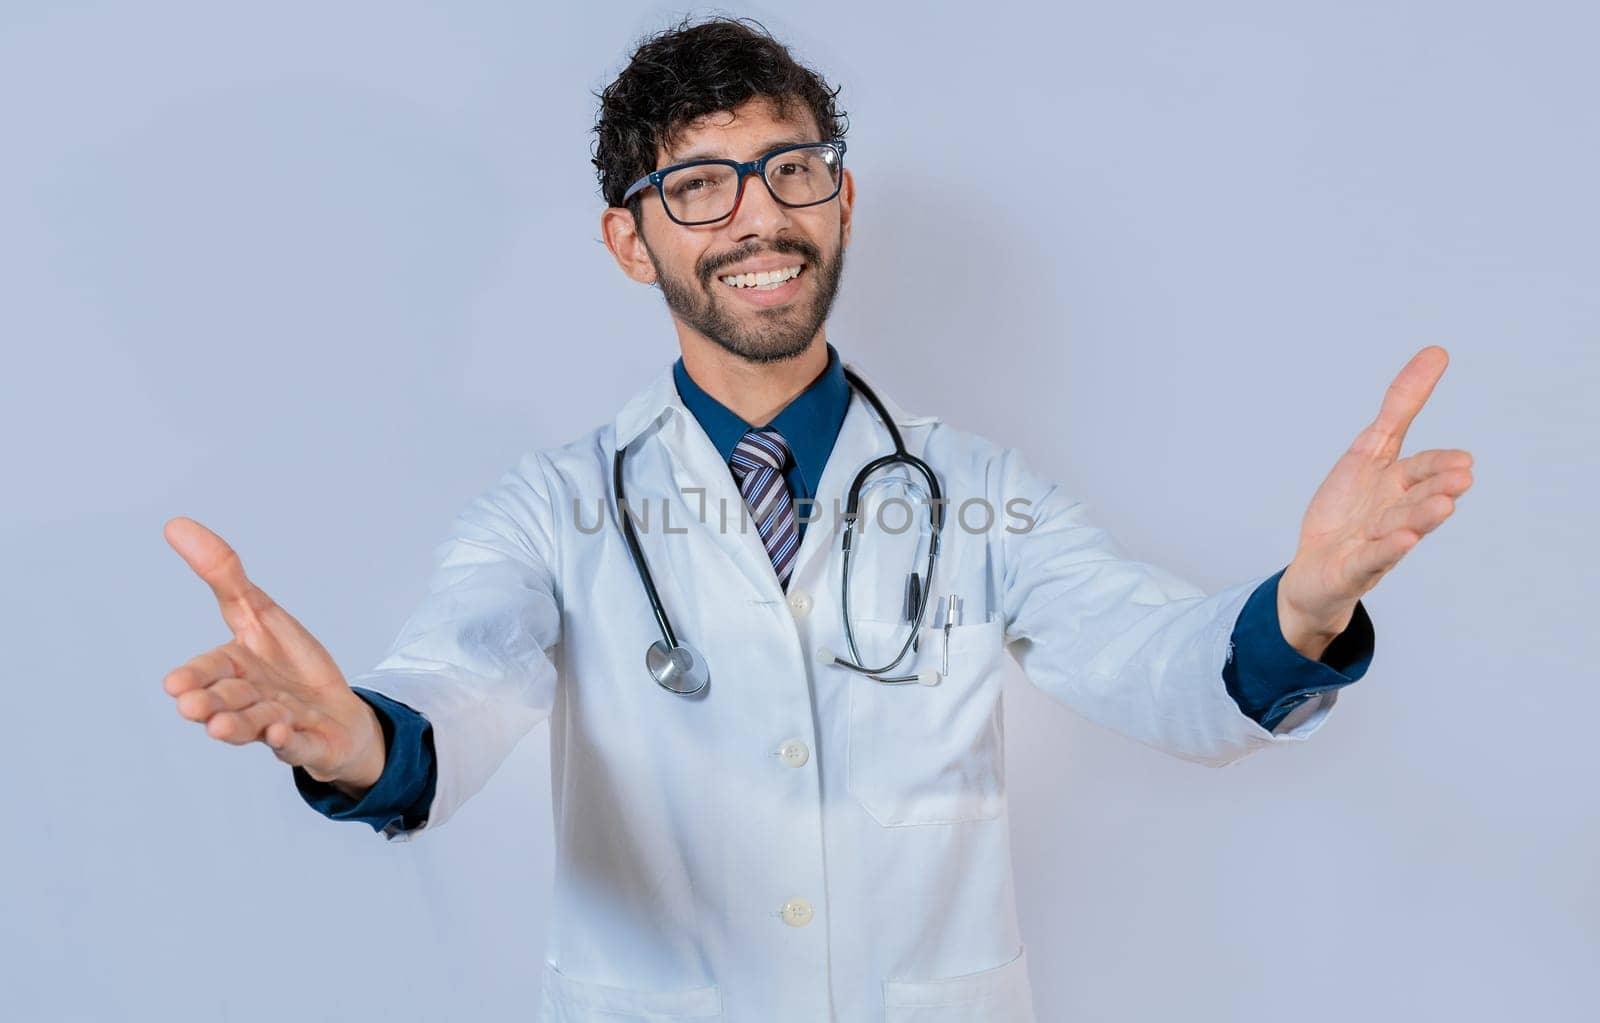 Doctor smiling with open arms welcoming. Friendly doctor hugging the camera. Medical friendship concept by isaiphoto